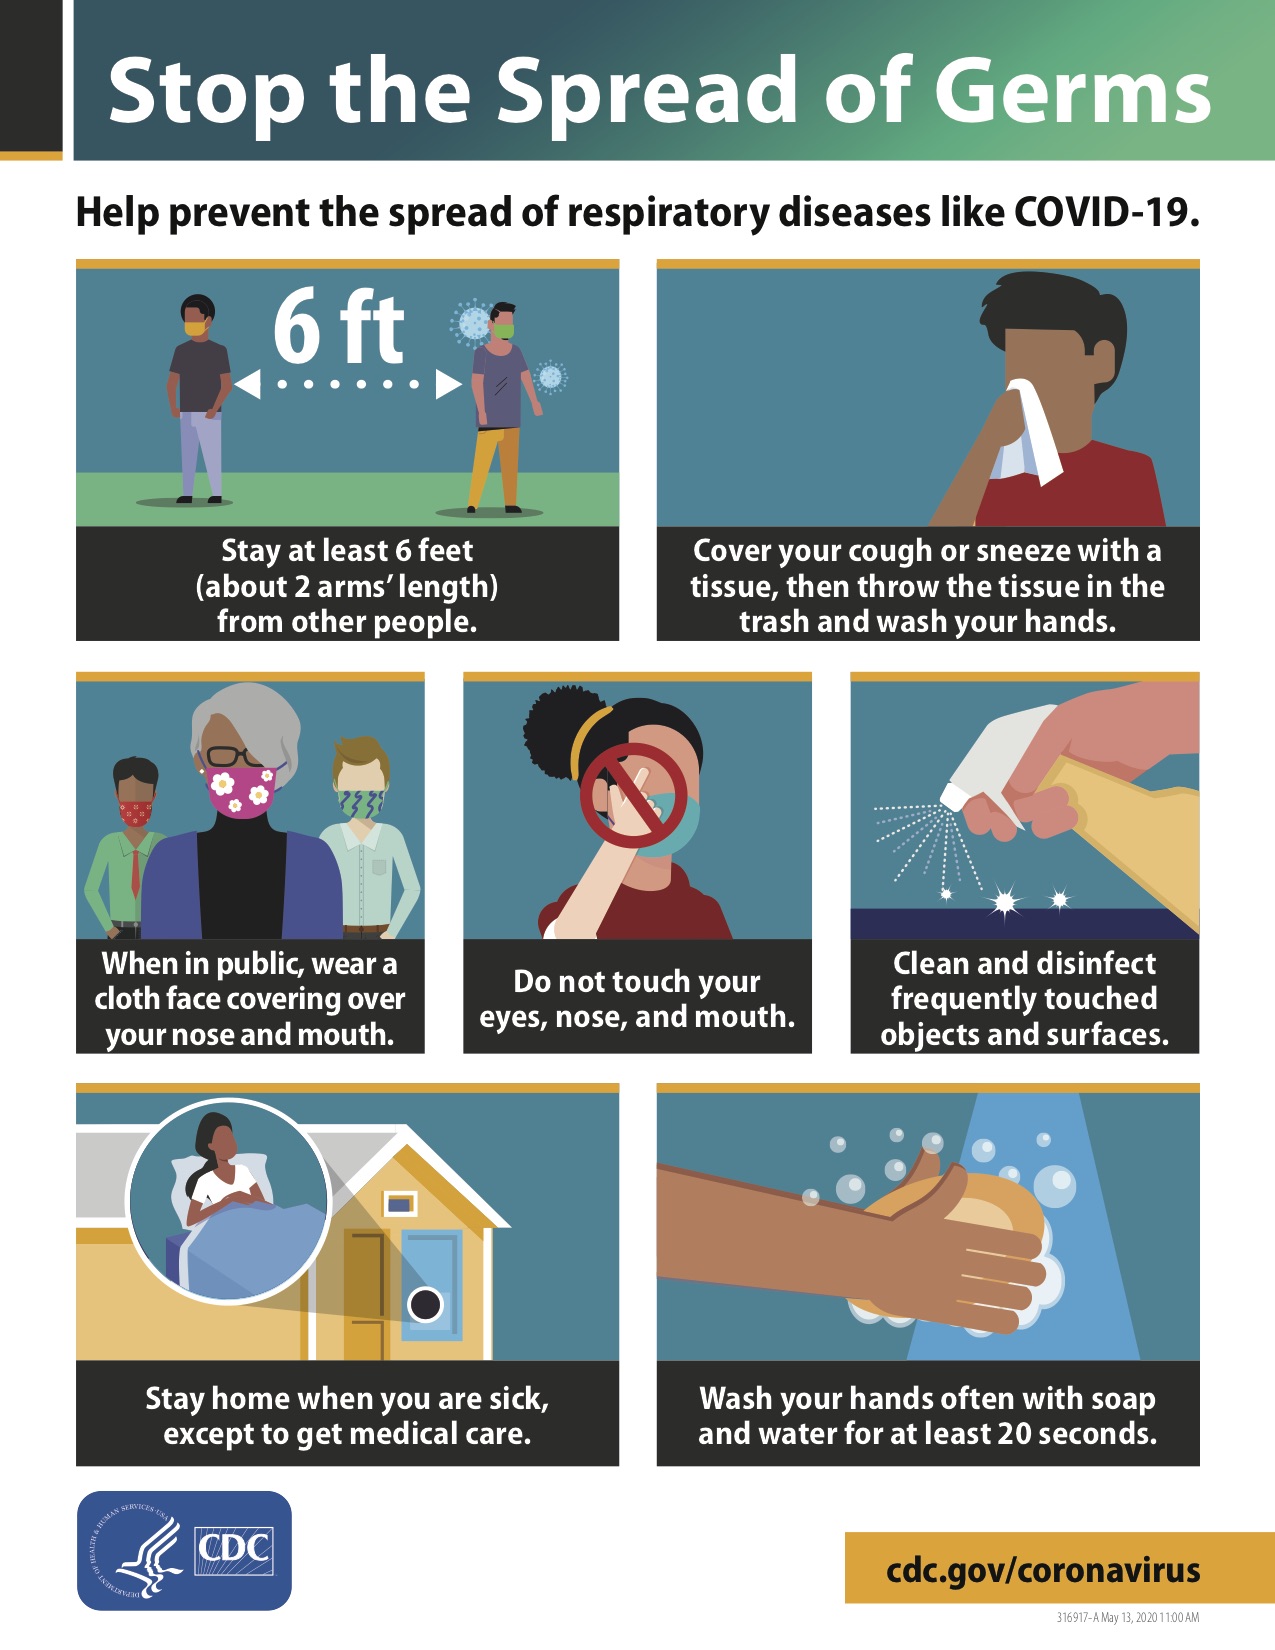 Stop the Spread of Germs poster